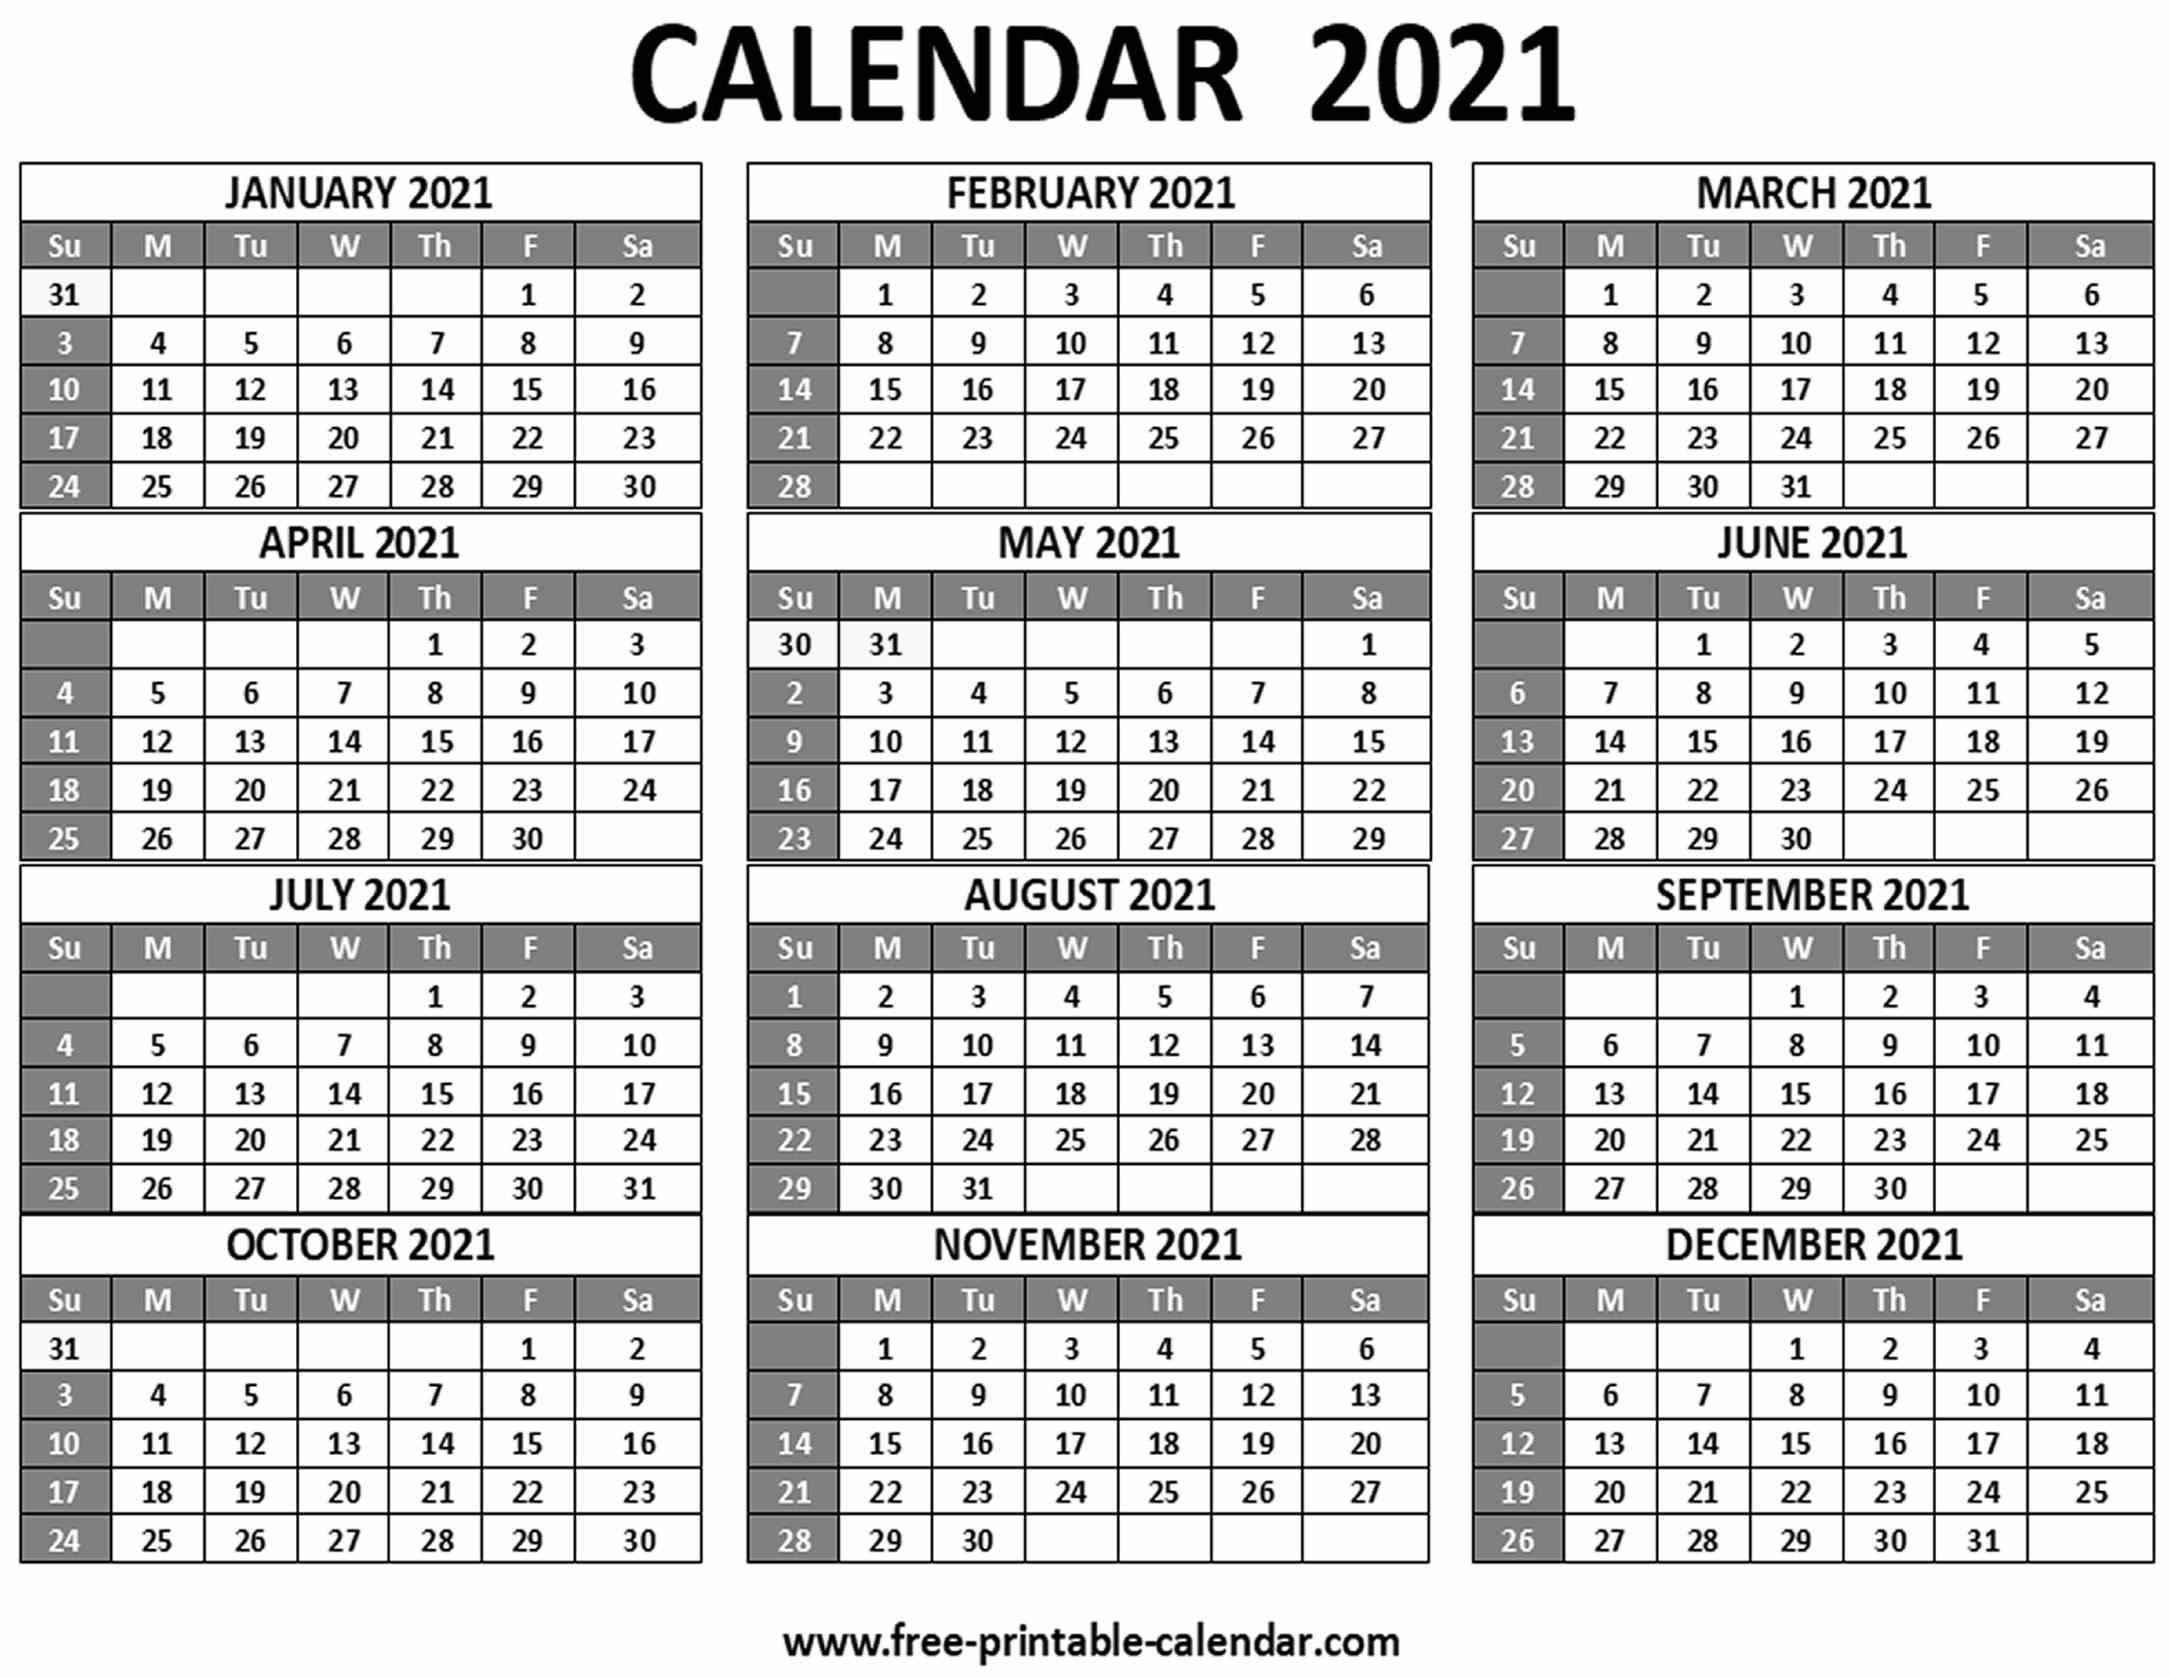 Printable 2021 Calendar - Free-Printable-Calendar-Calendar To Print 2021 4 Months To A Page